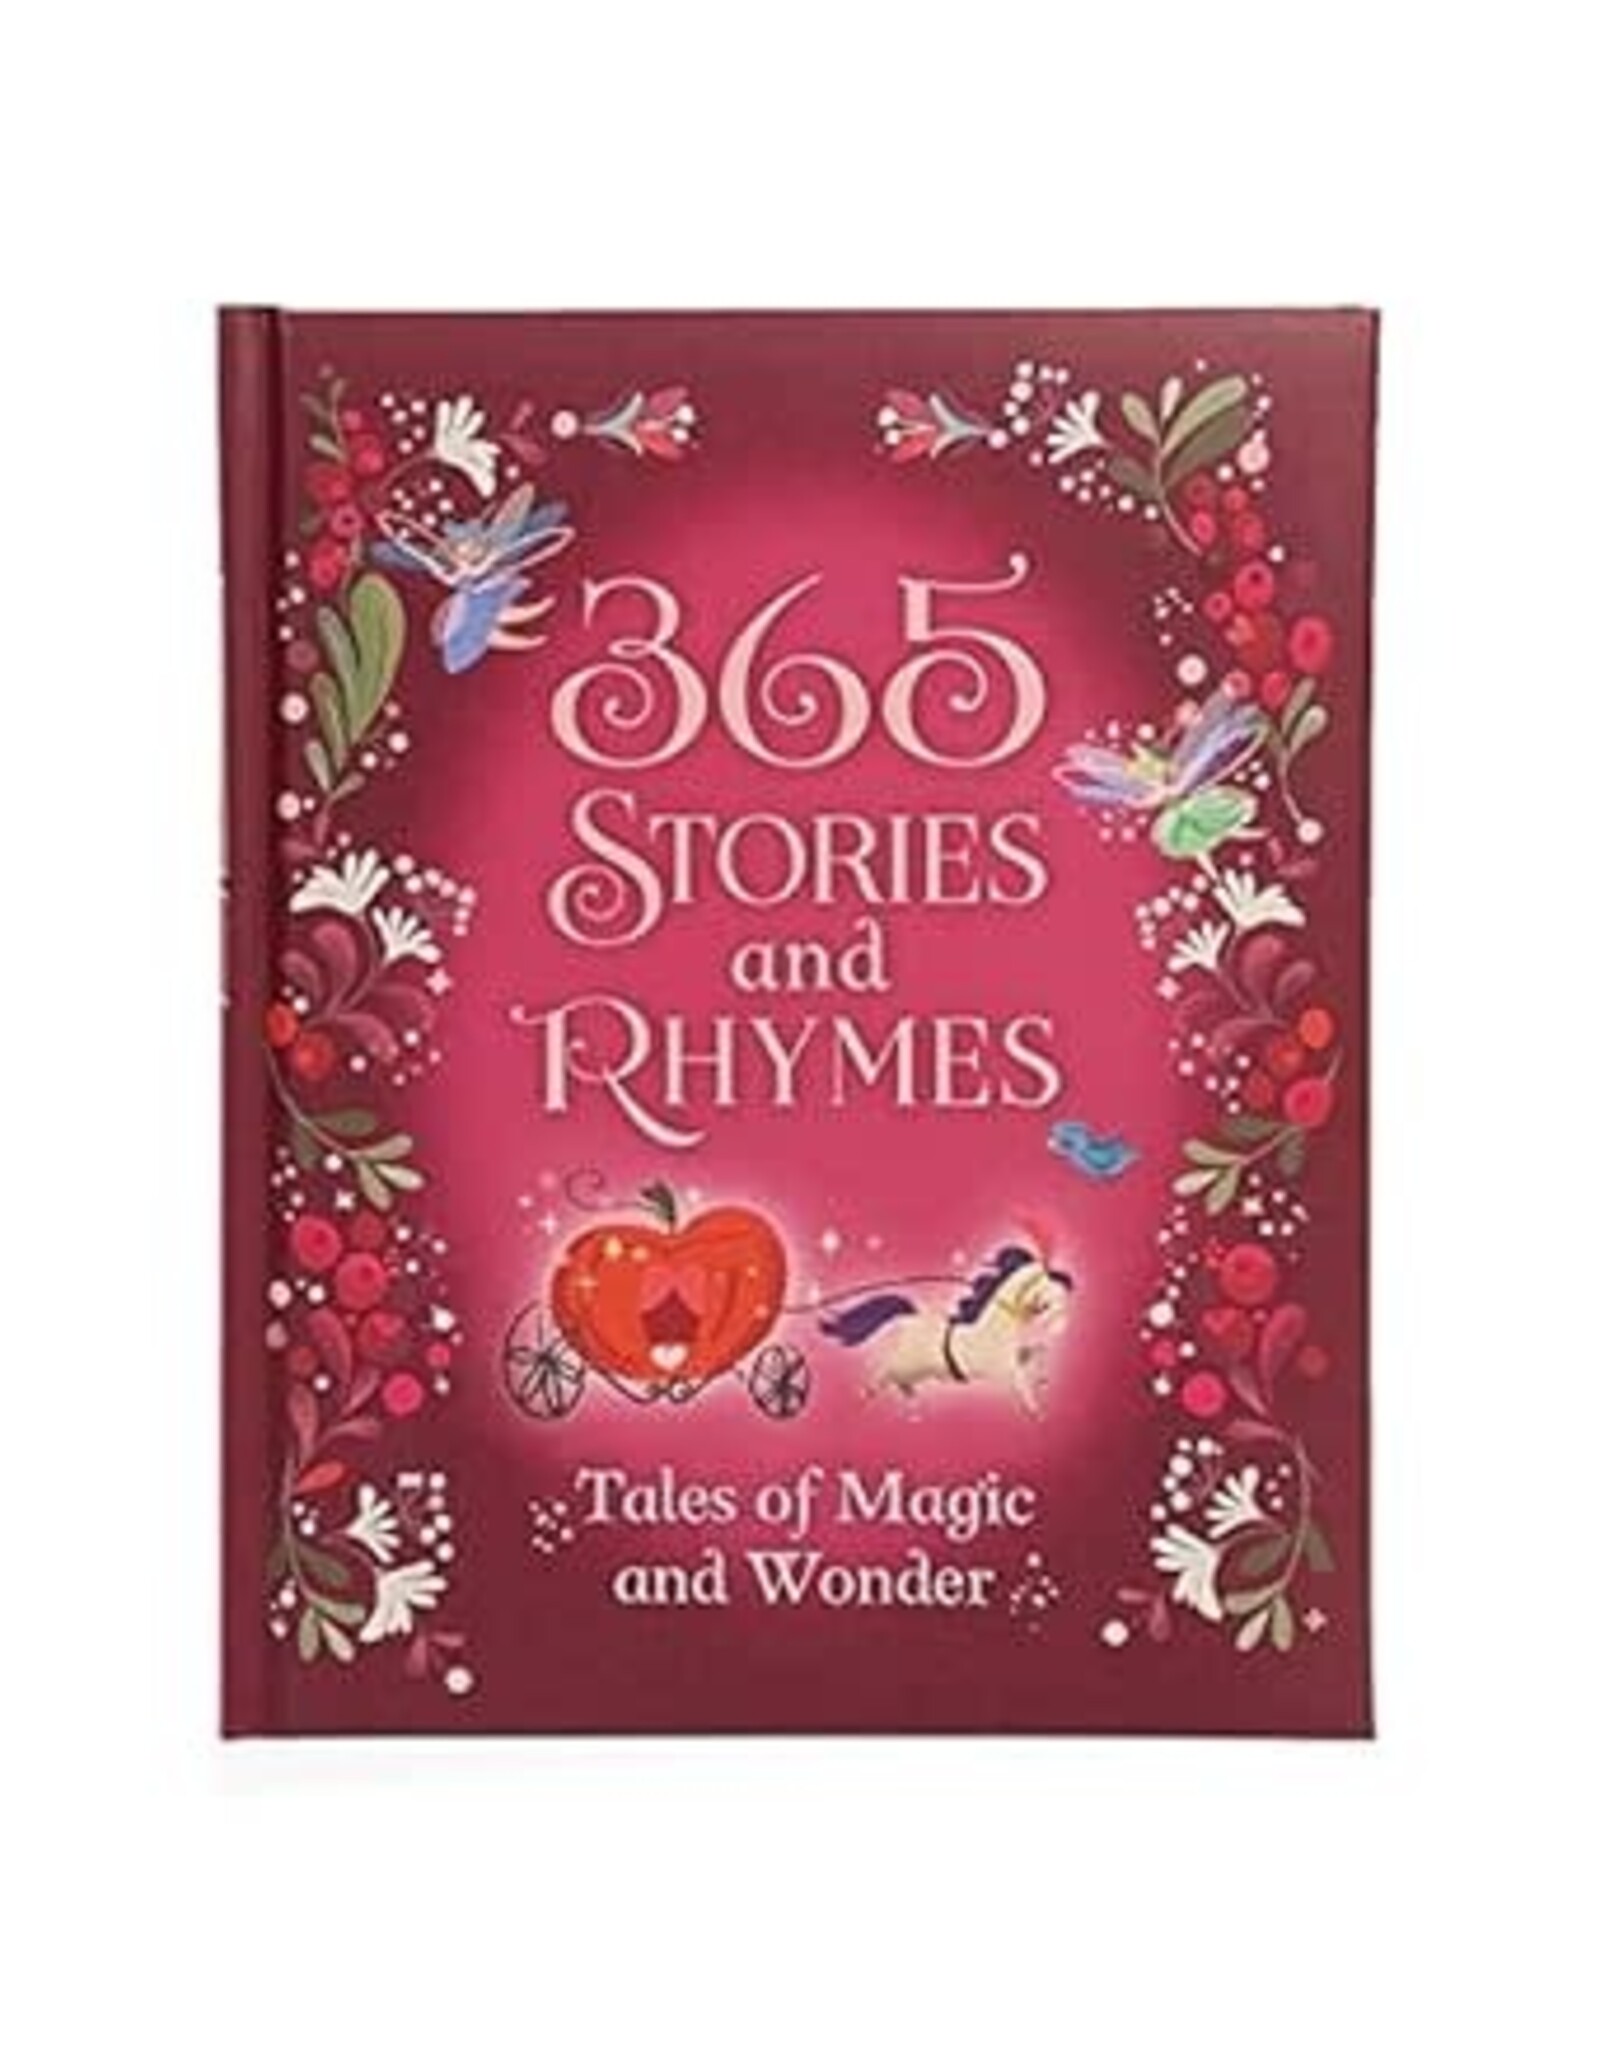 365 Stories and Rhymes - Tales of Magic and Wonder